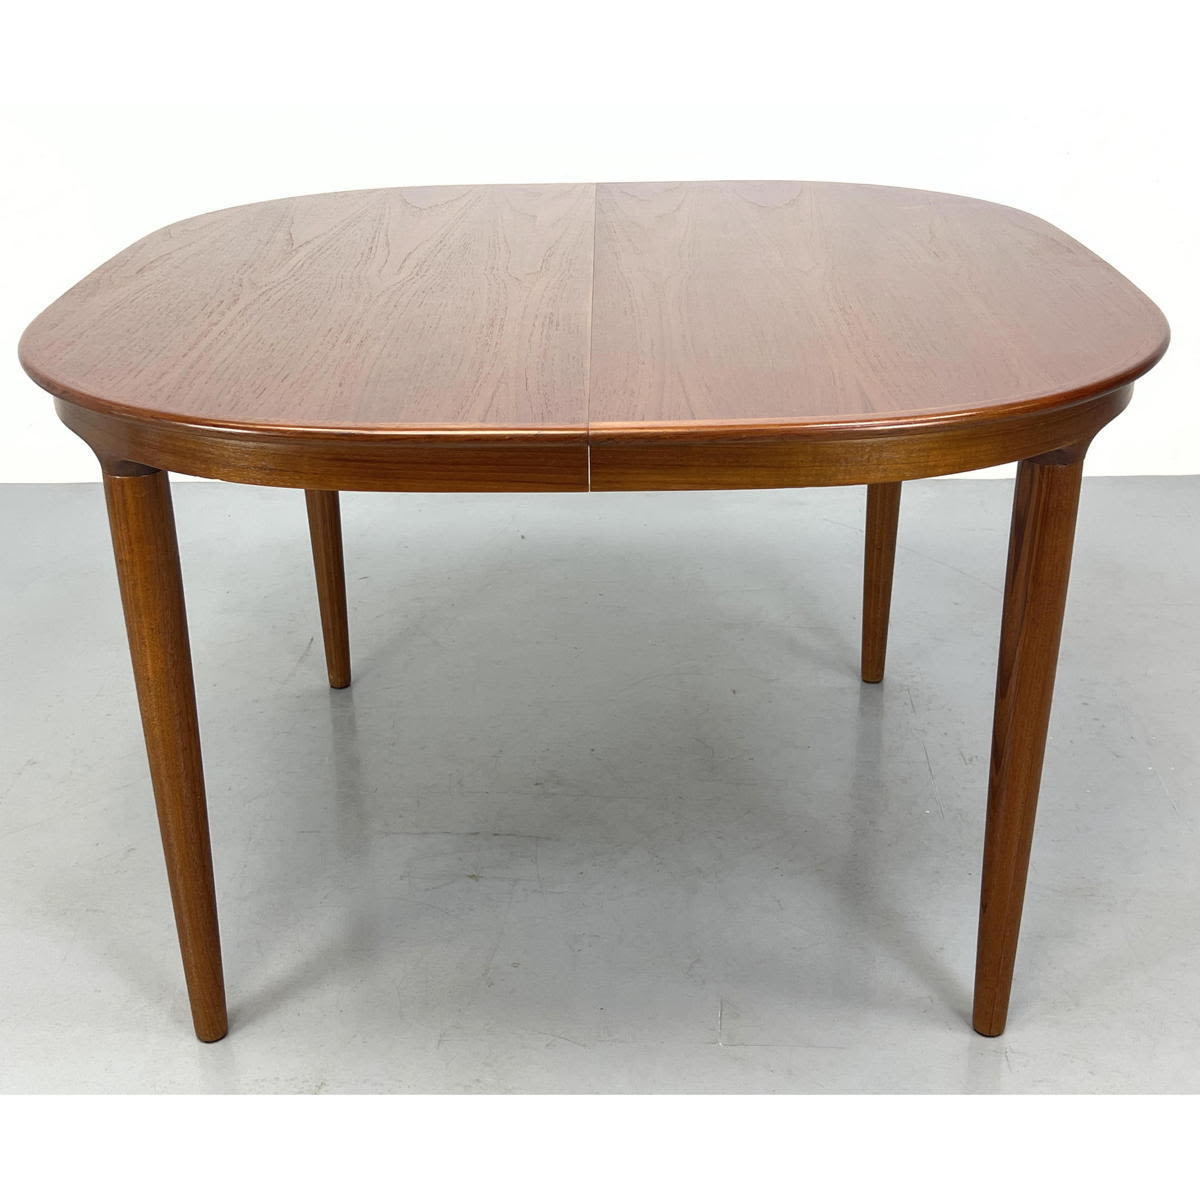 Danish teak dining table with rounded